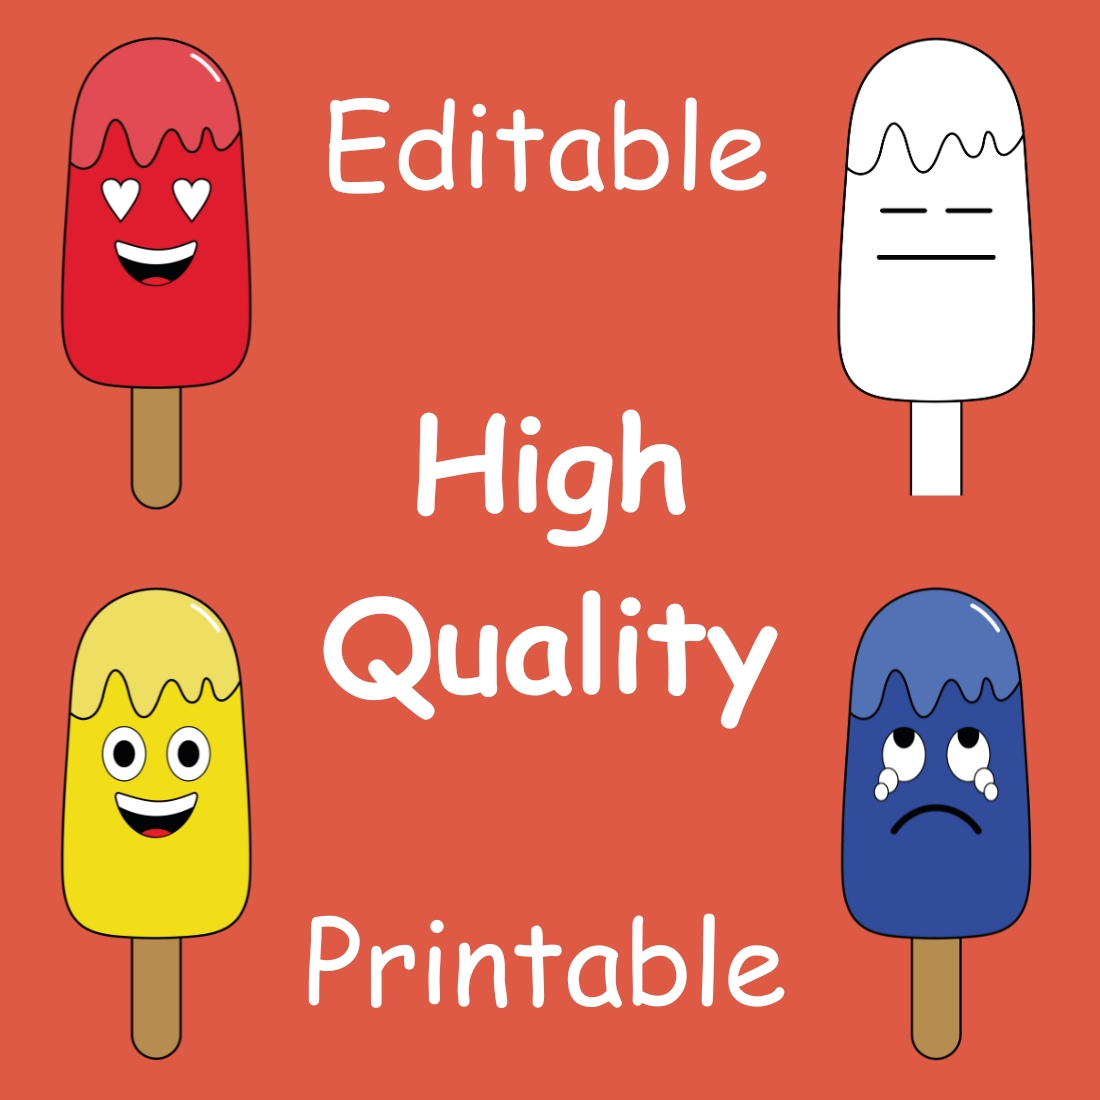 Popsicle Faces Emoji Emotions Clipart - 220 SVG and PNG only $7 preview image.